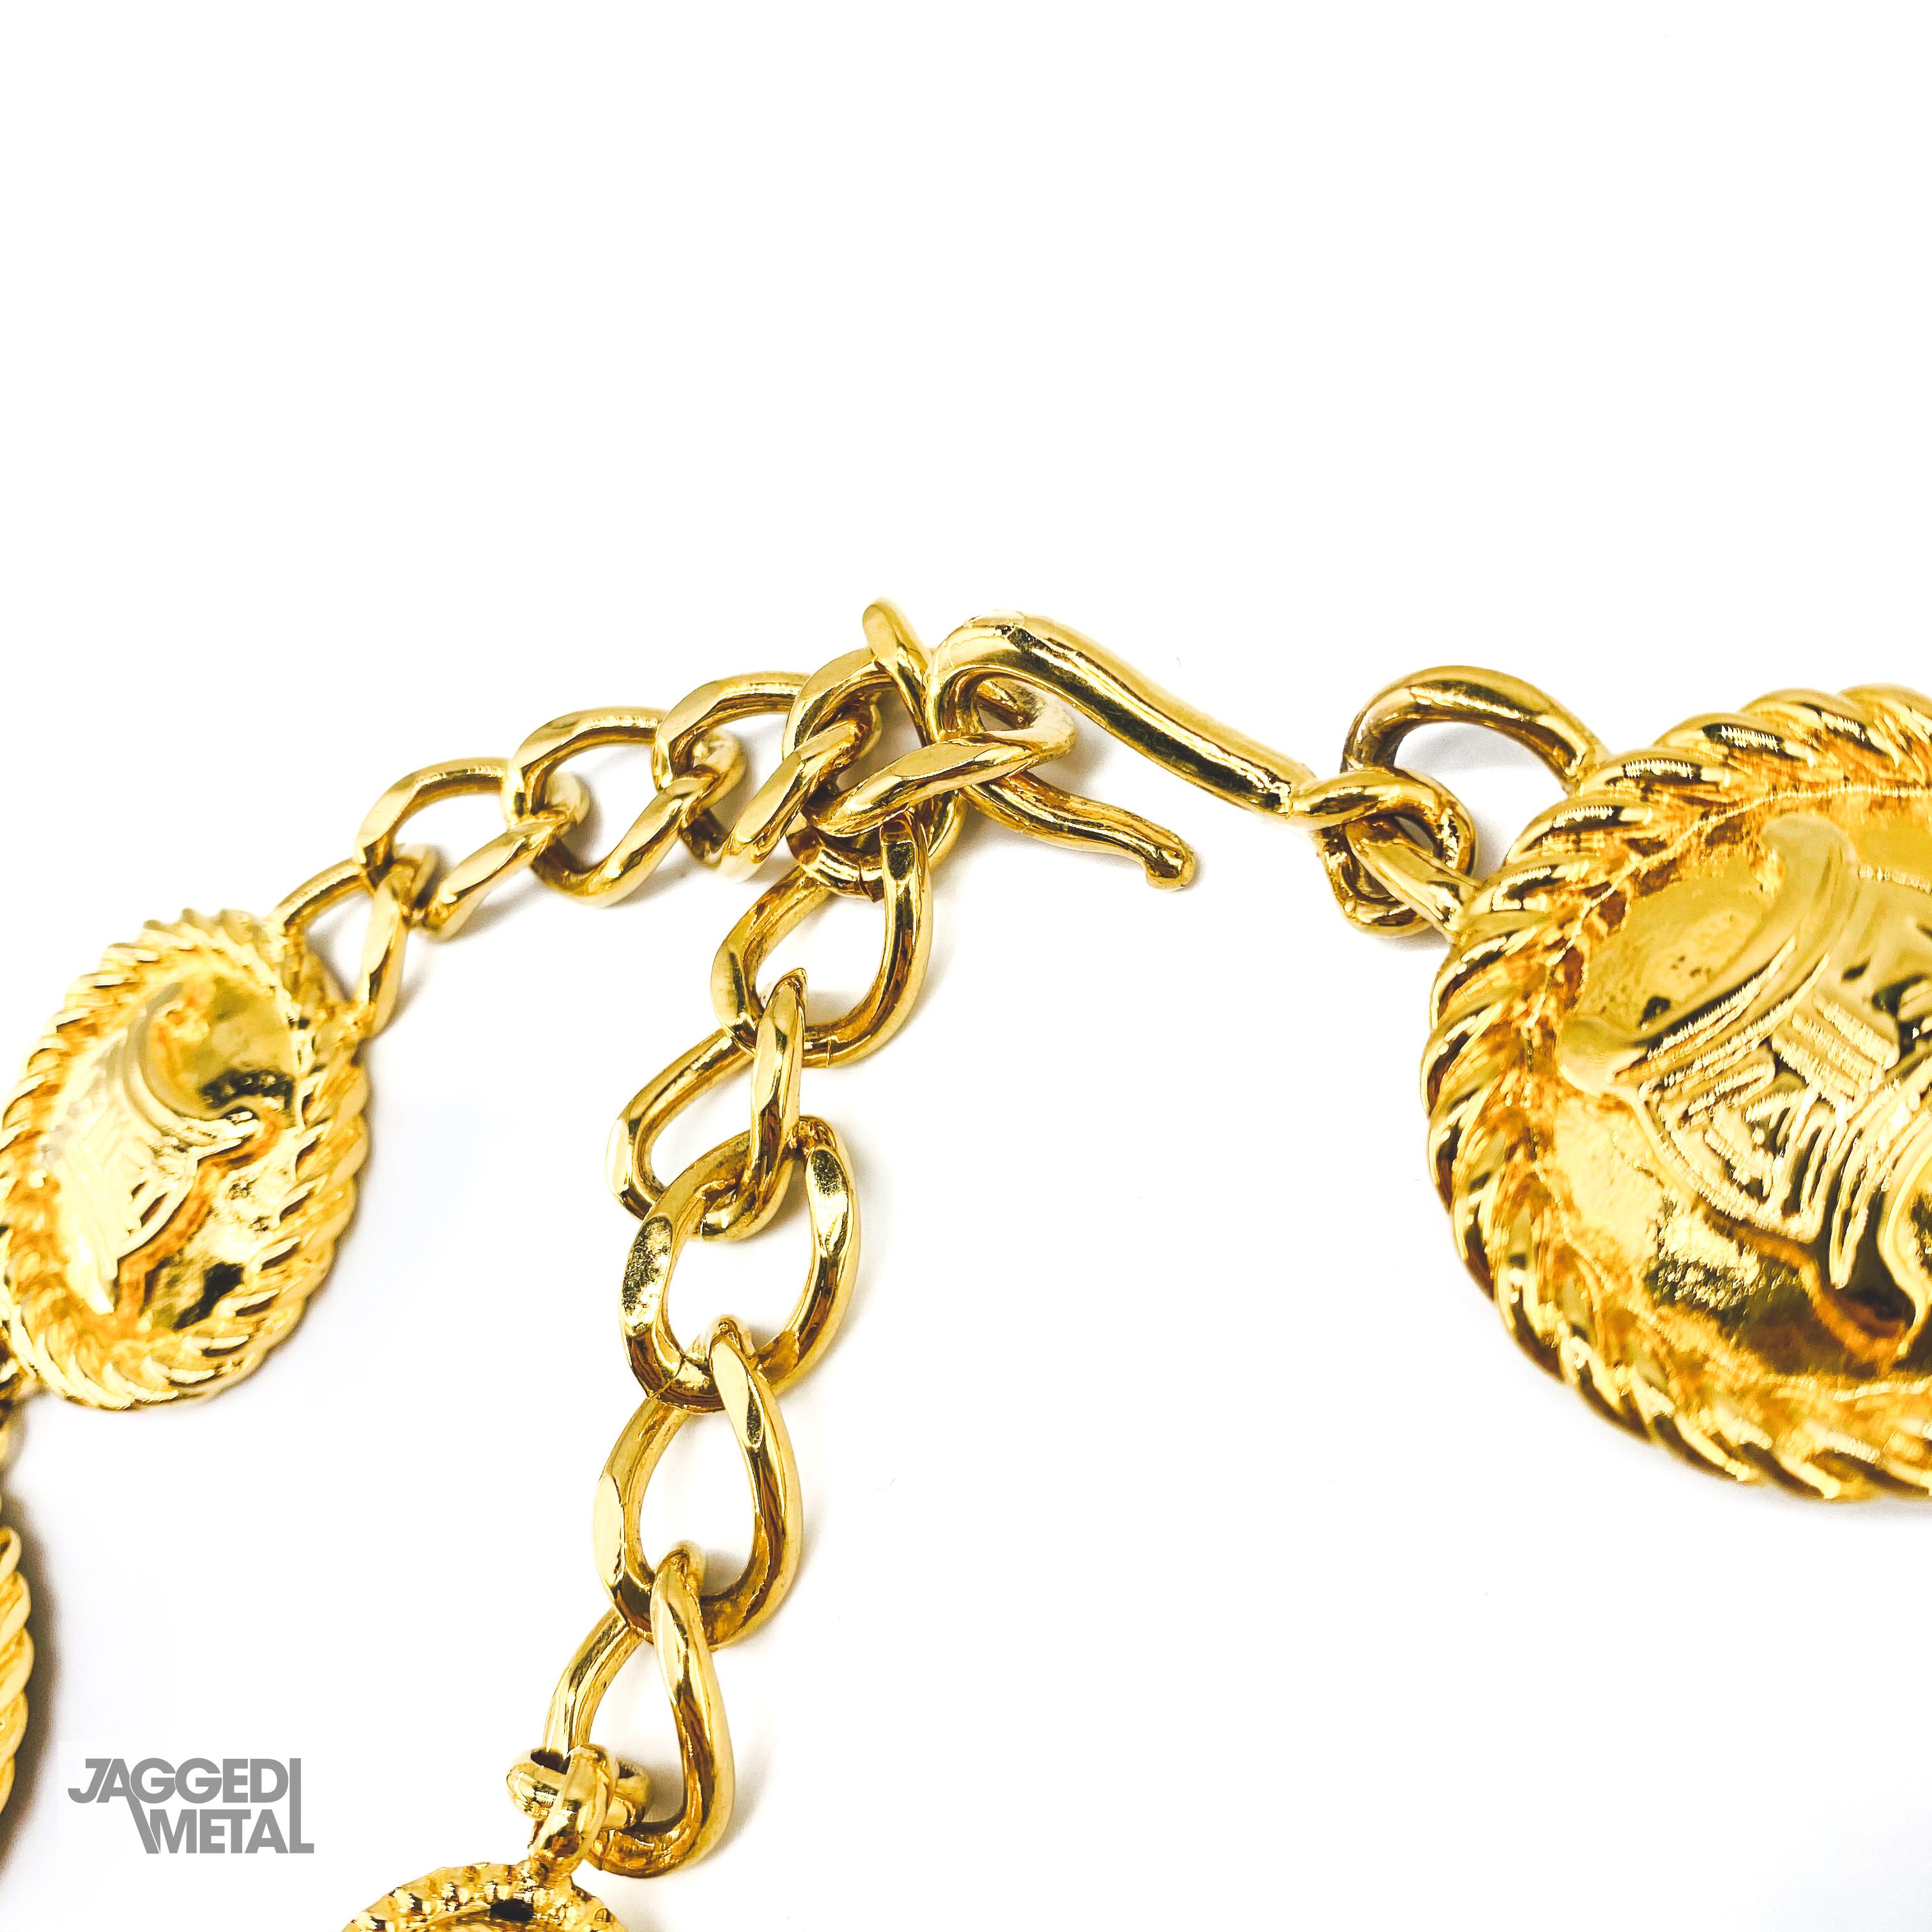 Celine Vintage Coin Necklace

An incredible and rare find from the 90s celine archive

Detail
-Made in Italy in 1991
-Crafted from high quality gold plated metal
-Constructed of 10 medallions featuring the Celine Macadam logo
-An iconic globe